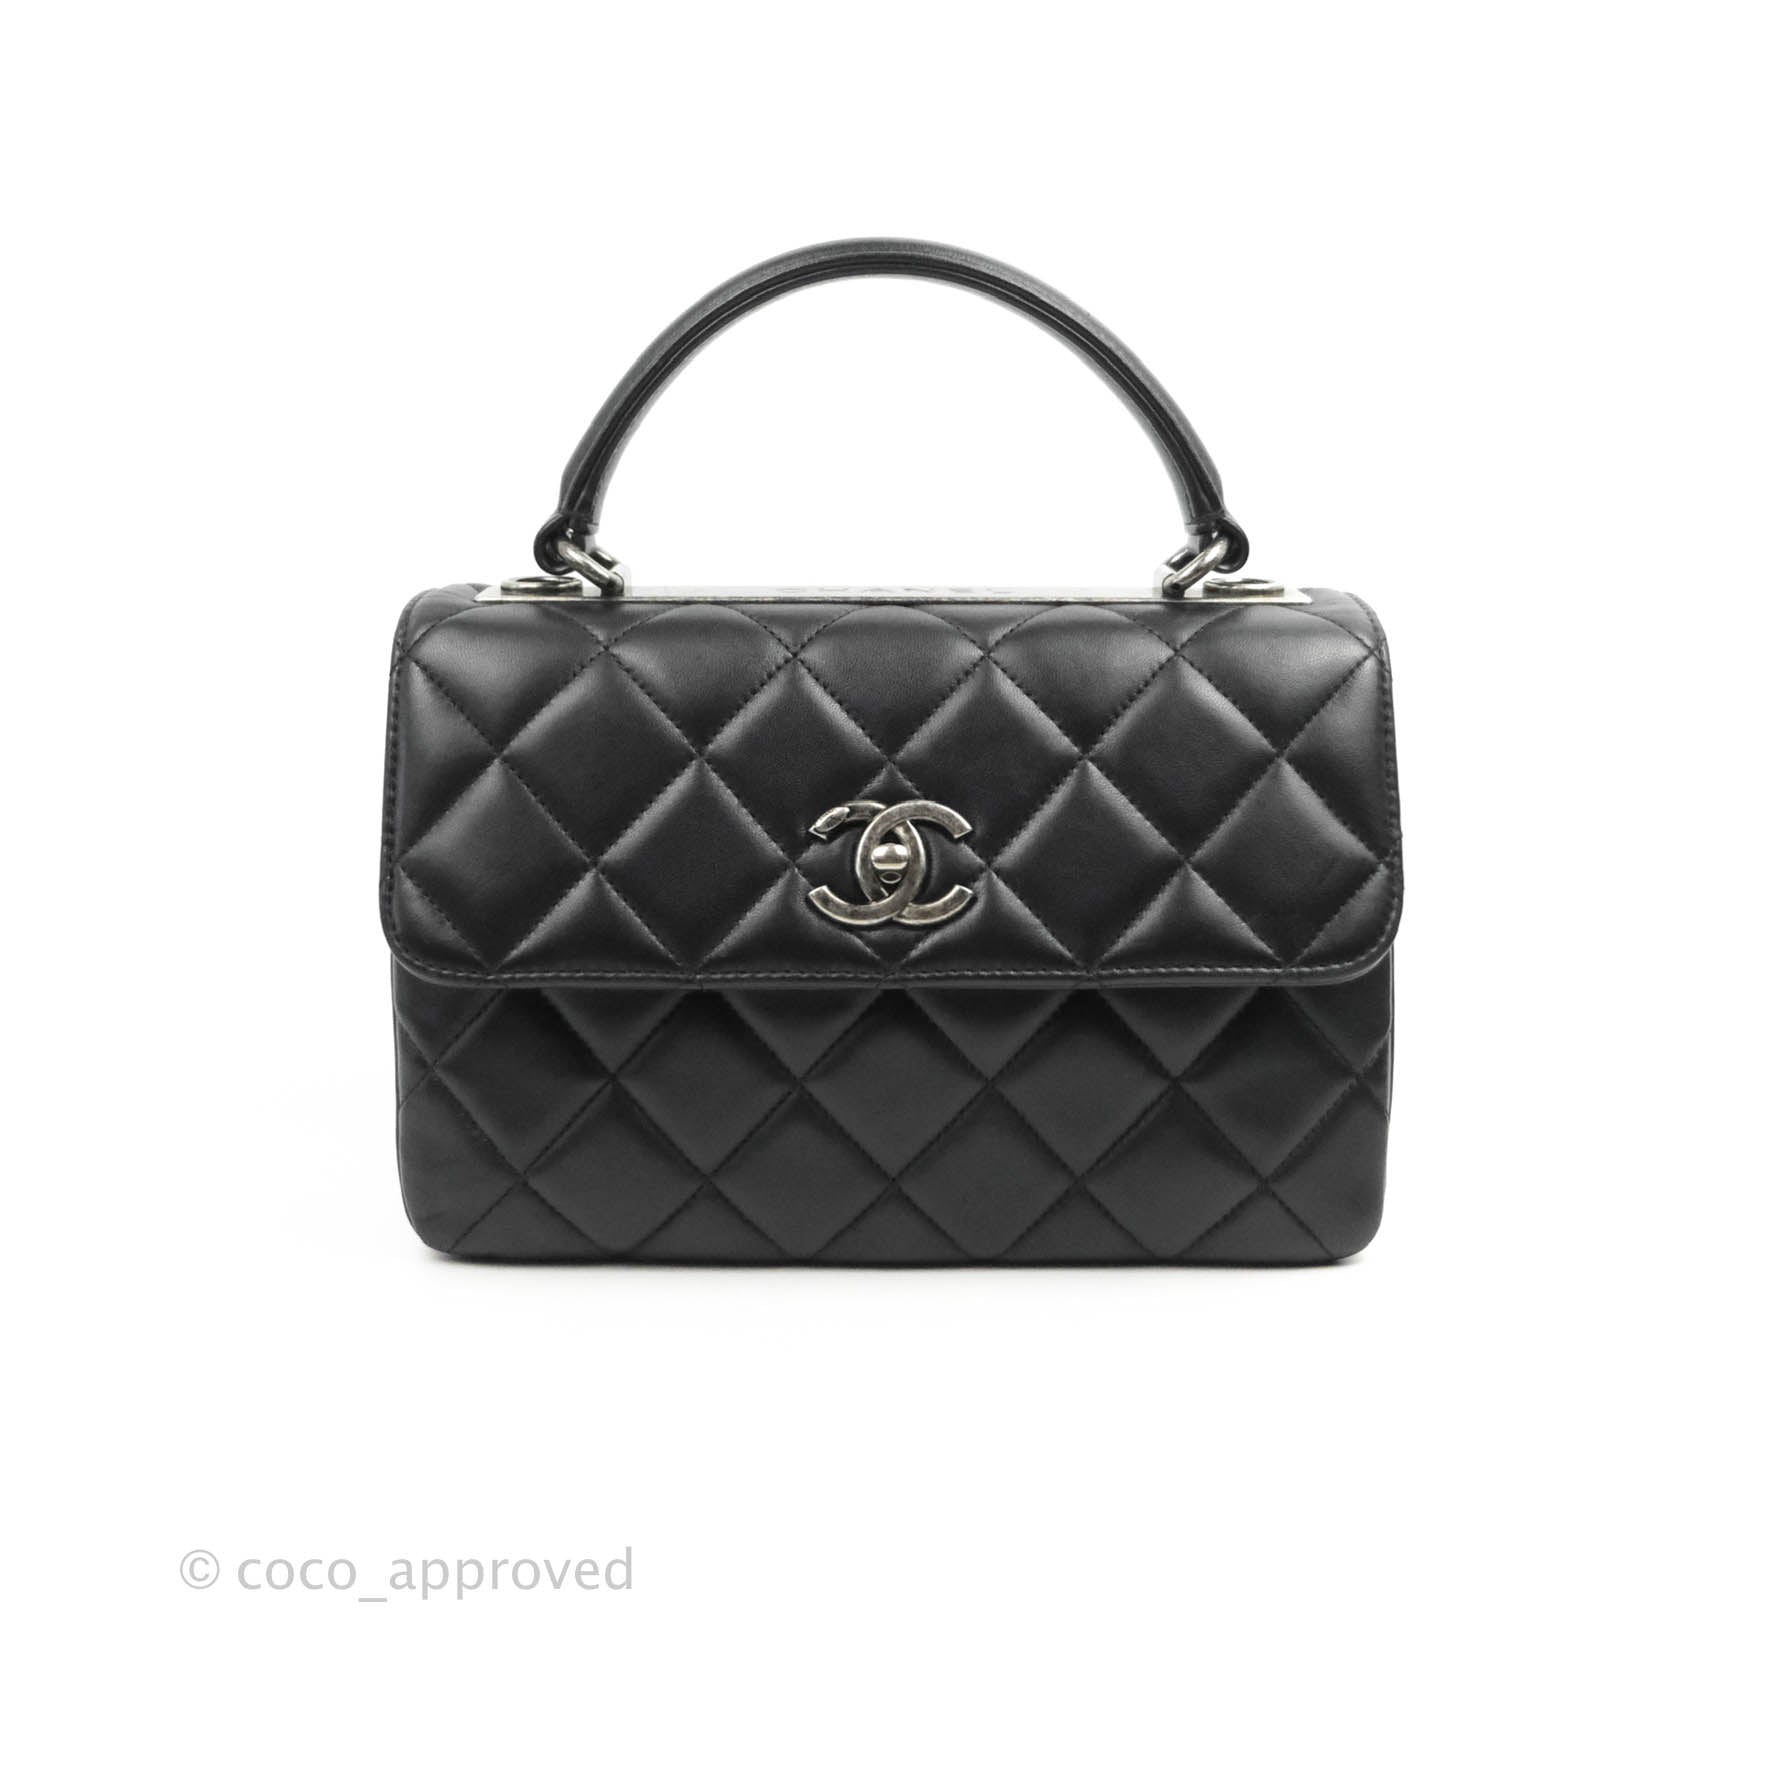 Cheer For Chanel 22B Collection - A brief introduction – Coco Approved  Studio